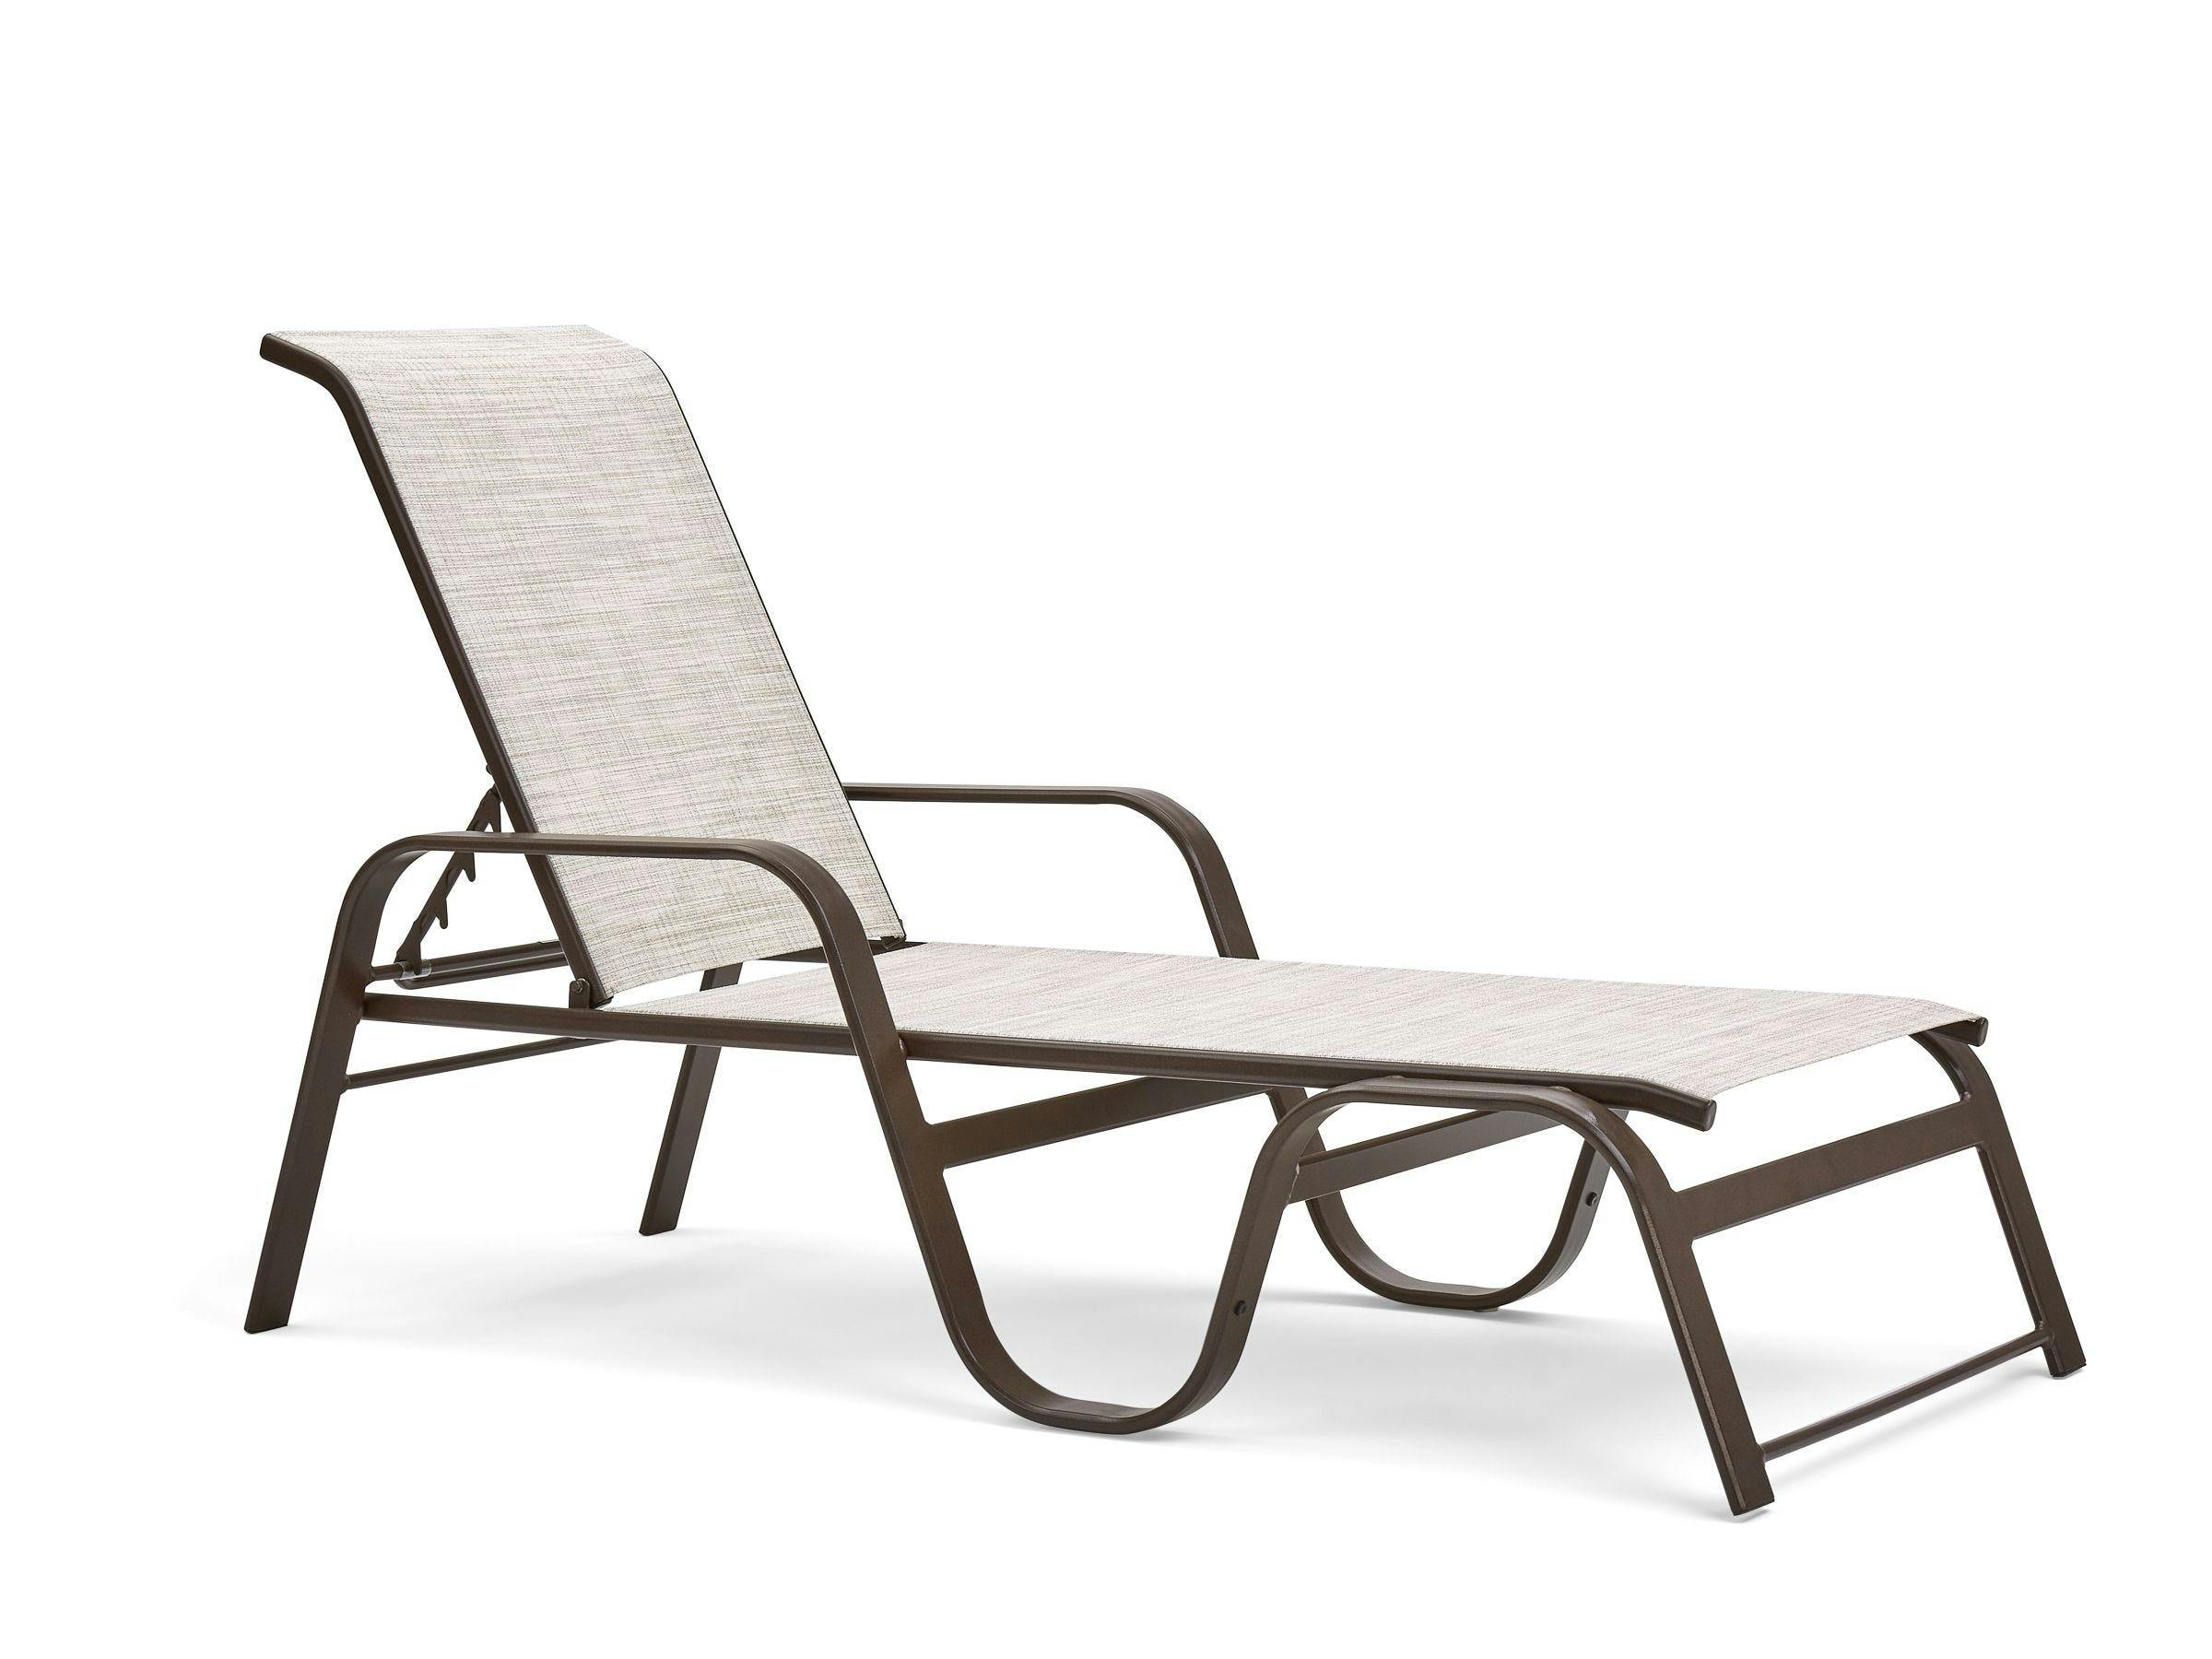 Seagrove II Stacking Adjustable Chaise